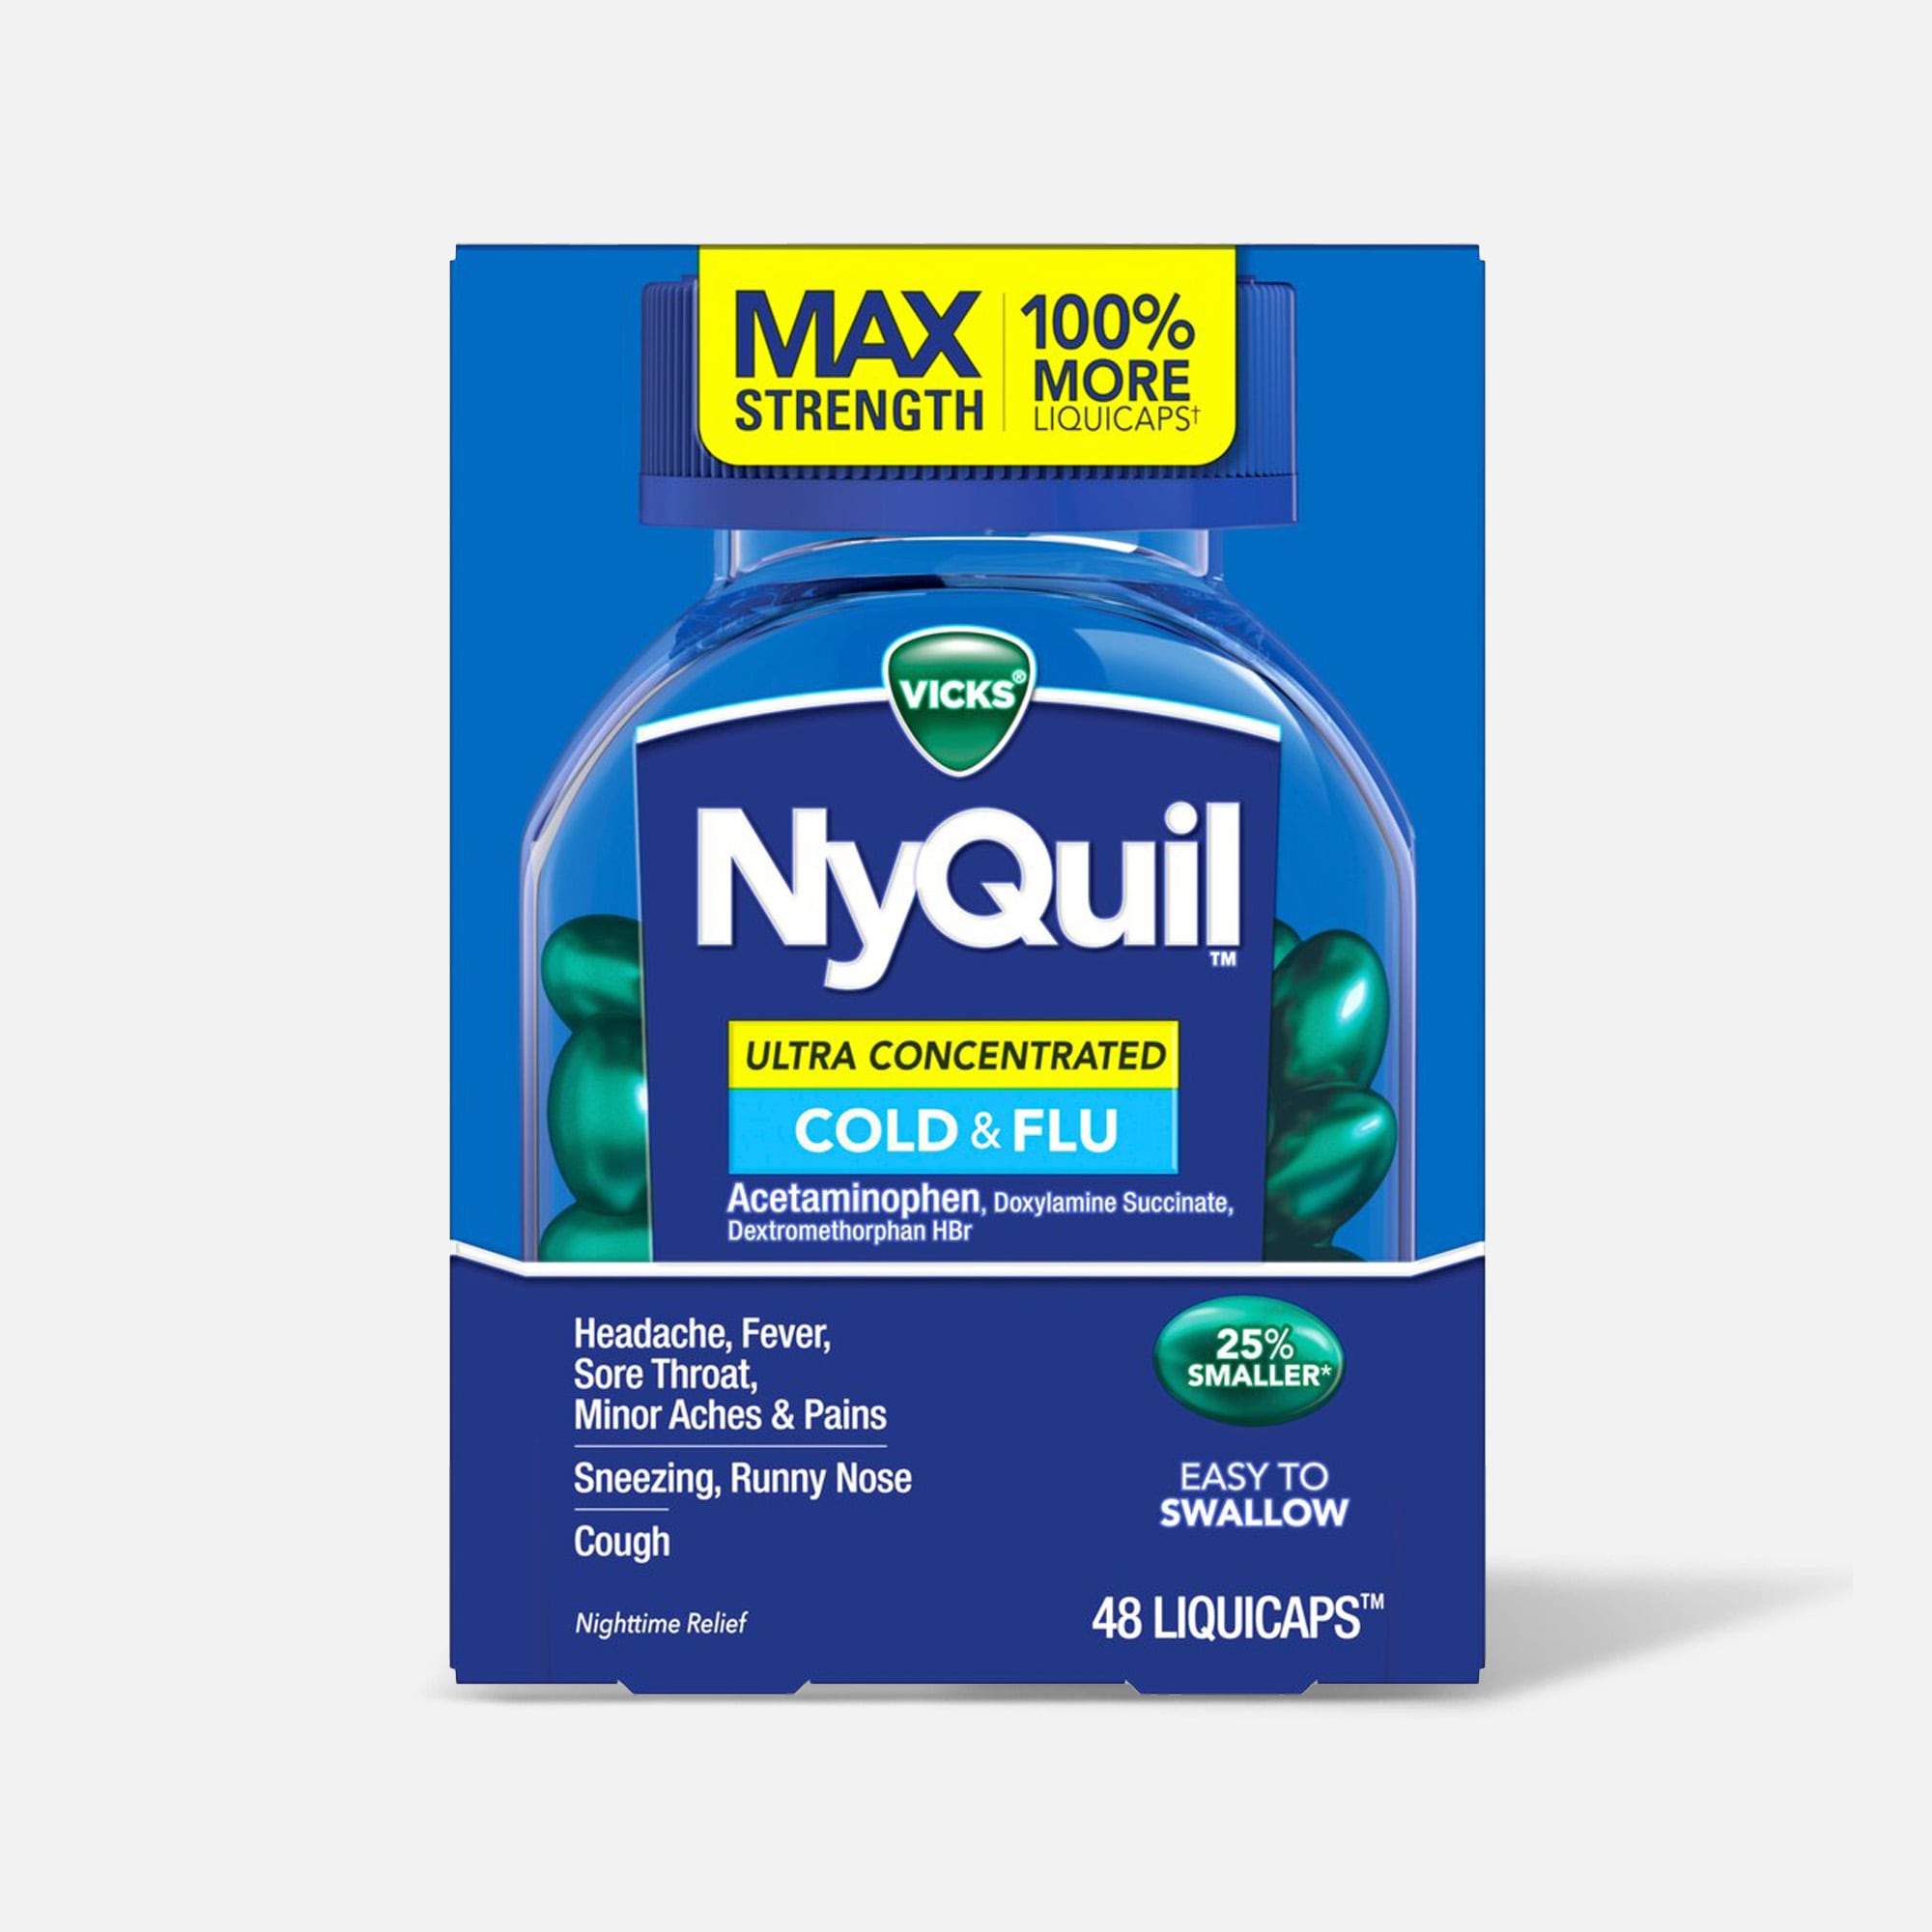 Vicks NyQuil Nighttime Ultra Concentrated Cold and Flu Medicine Liquicaps,  48 ct.